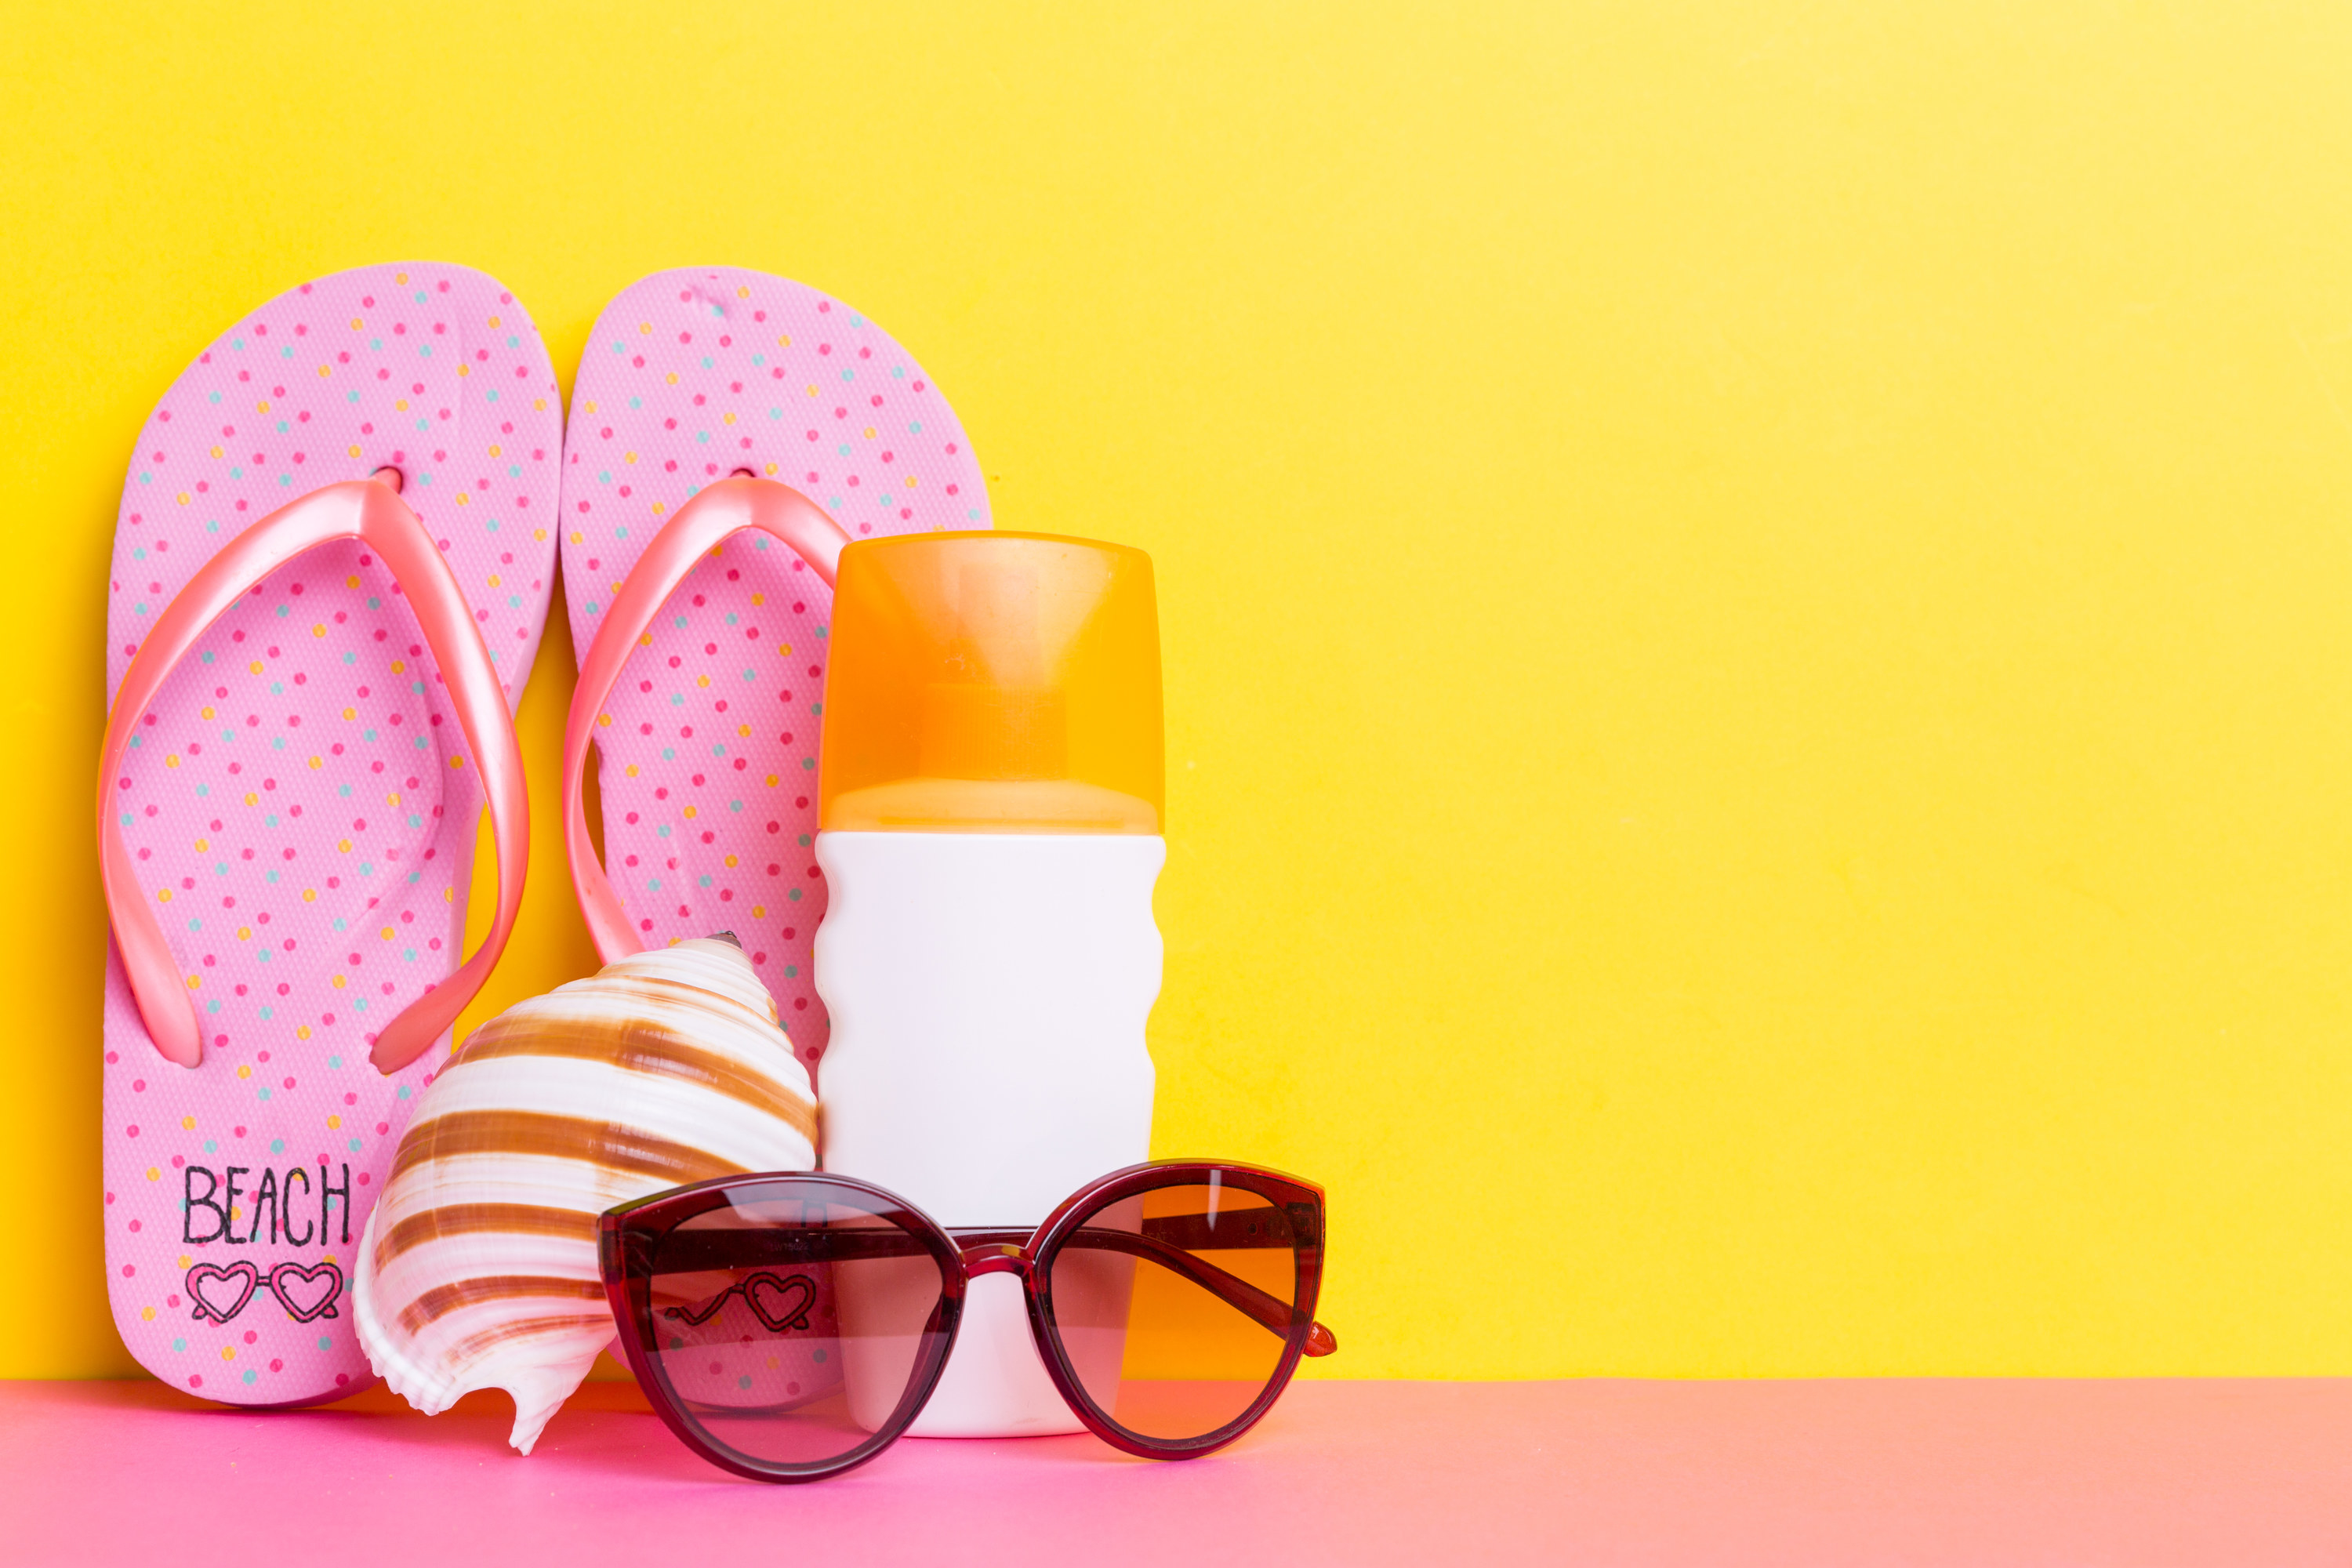 Beach accessories. Pink flip flops, sunglasses, sunscreen, and a sea shell propped against the wall